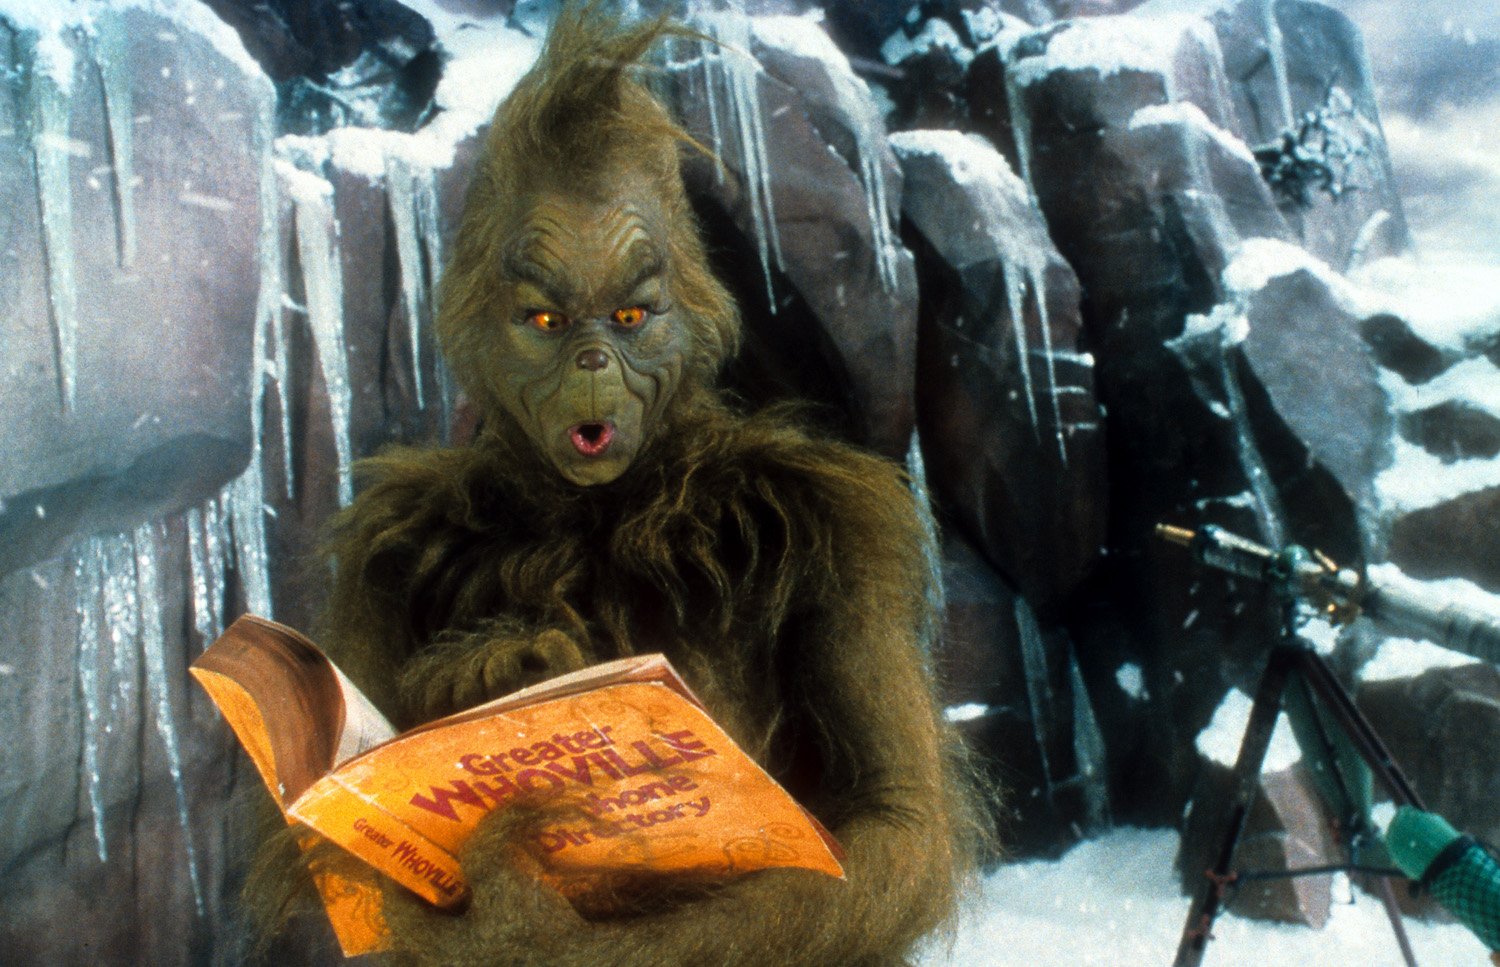 Jim Carrey in the Grinch, as seen here, is one of five holiday movies you can stream right now.